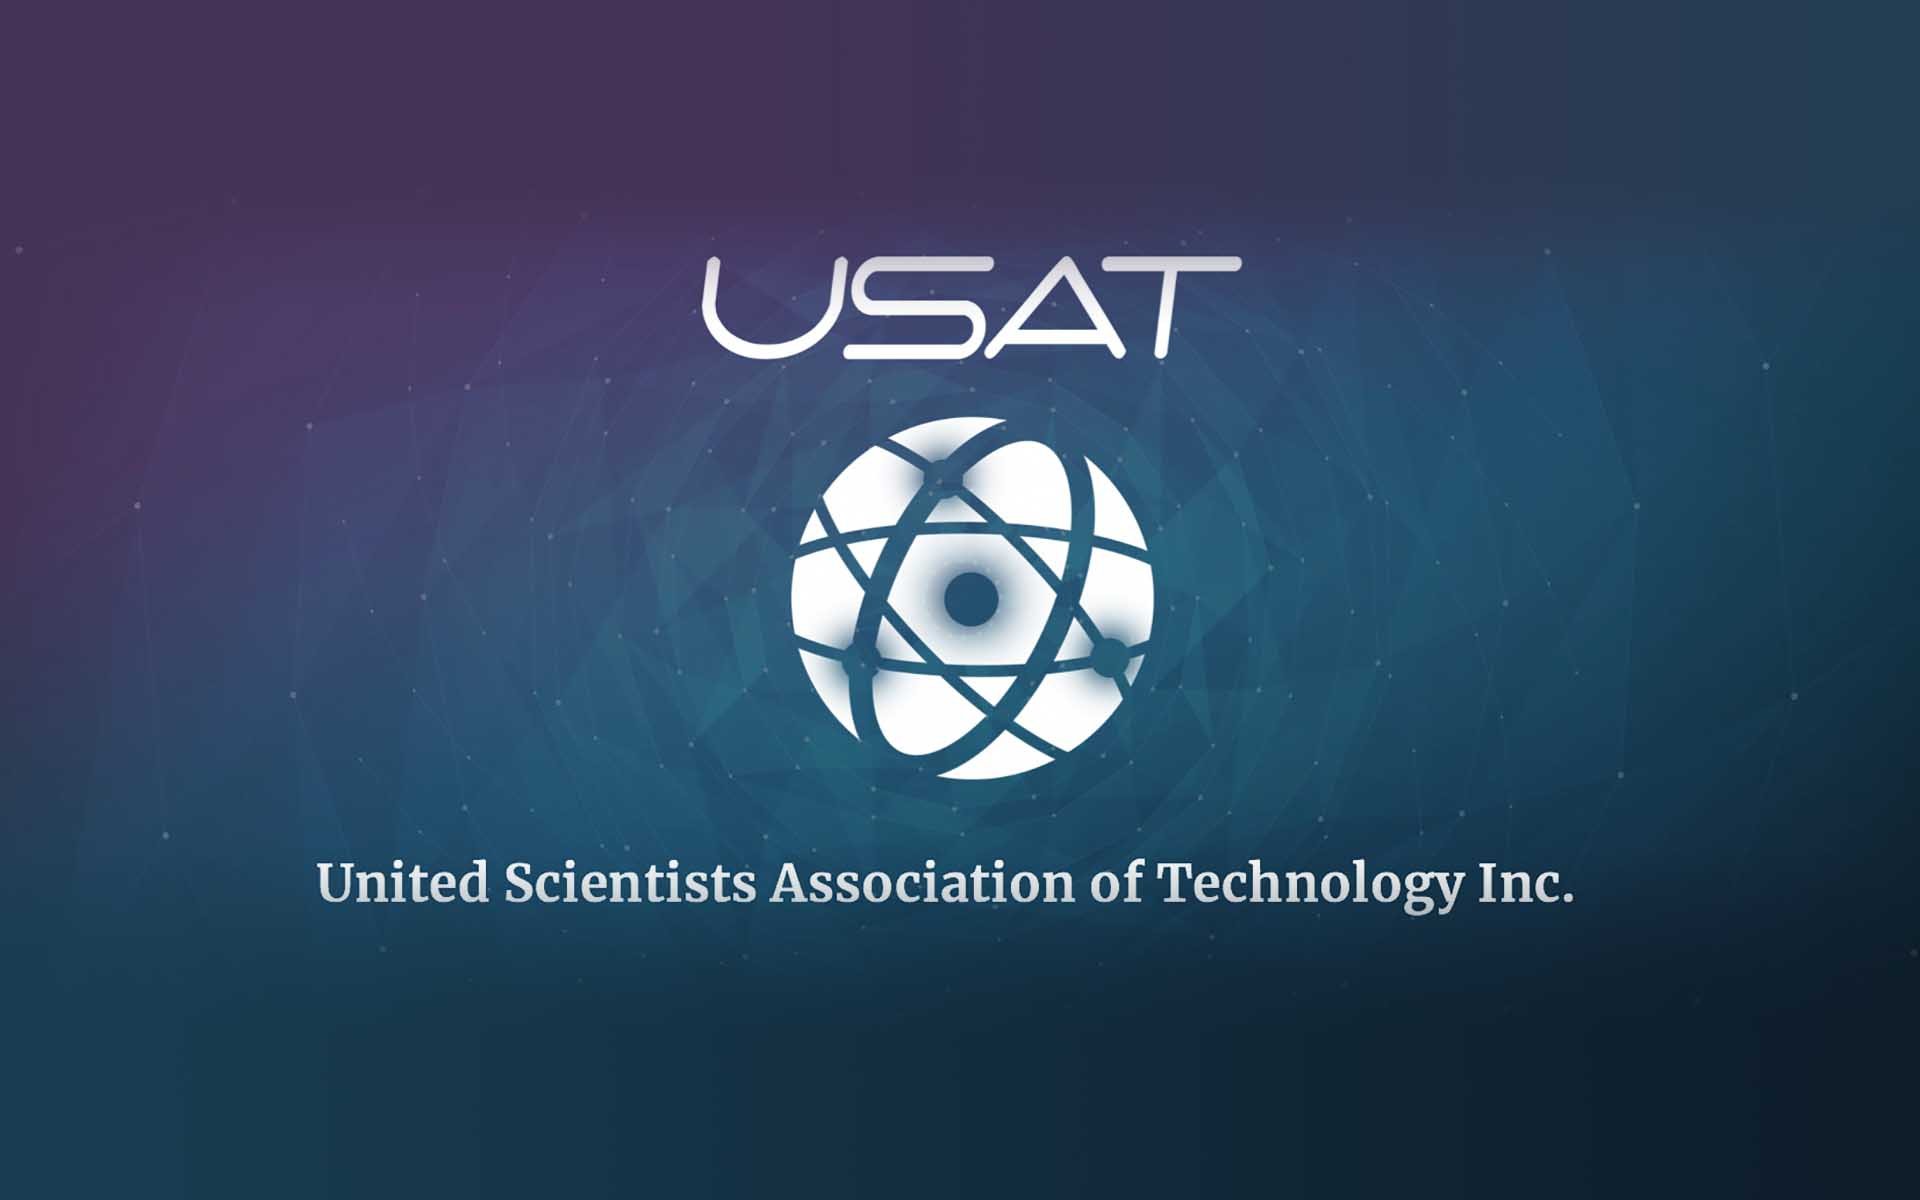 50% Bonus on USAT Token Purchases Until 31st March, 2023; USAT Inc. Uses Blockchain to Help Inventors Patent, Protect, and Develop Their IP